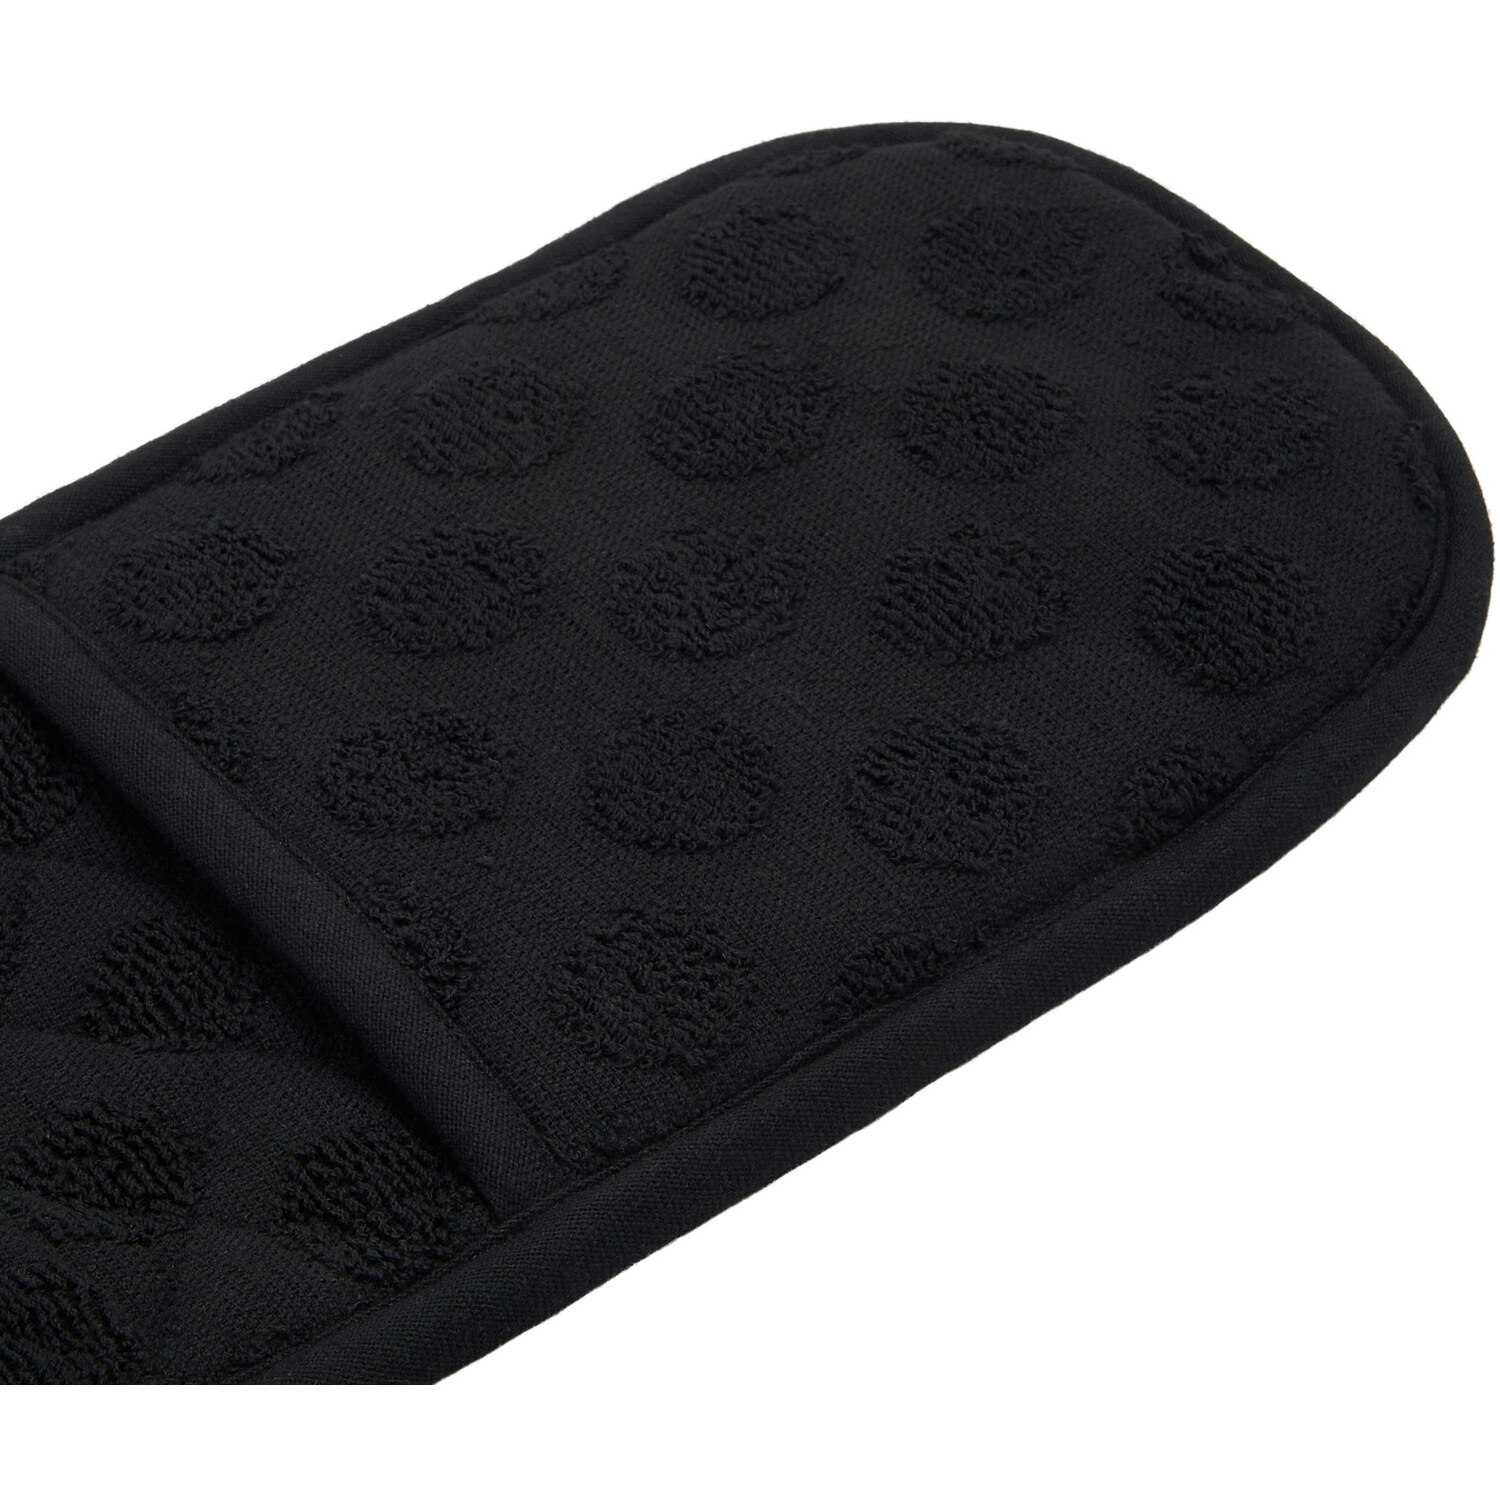 Dobby Terry Double Oven Glove - Black Image 5